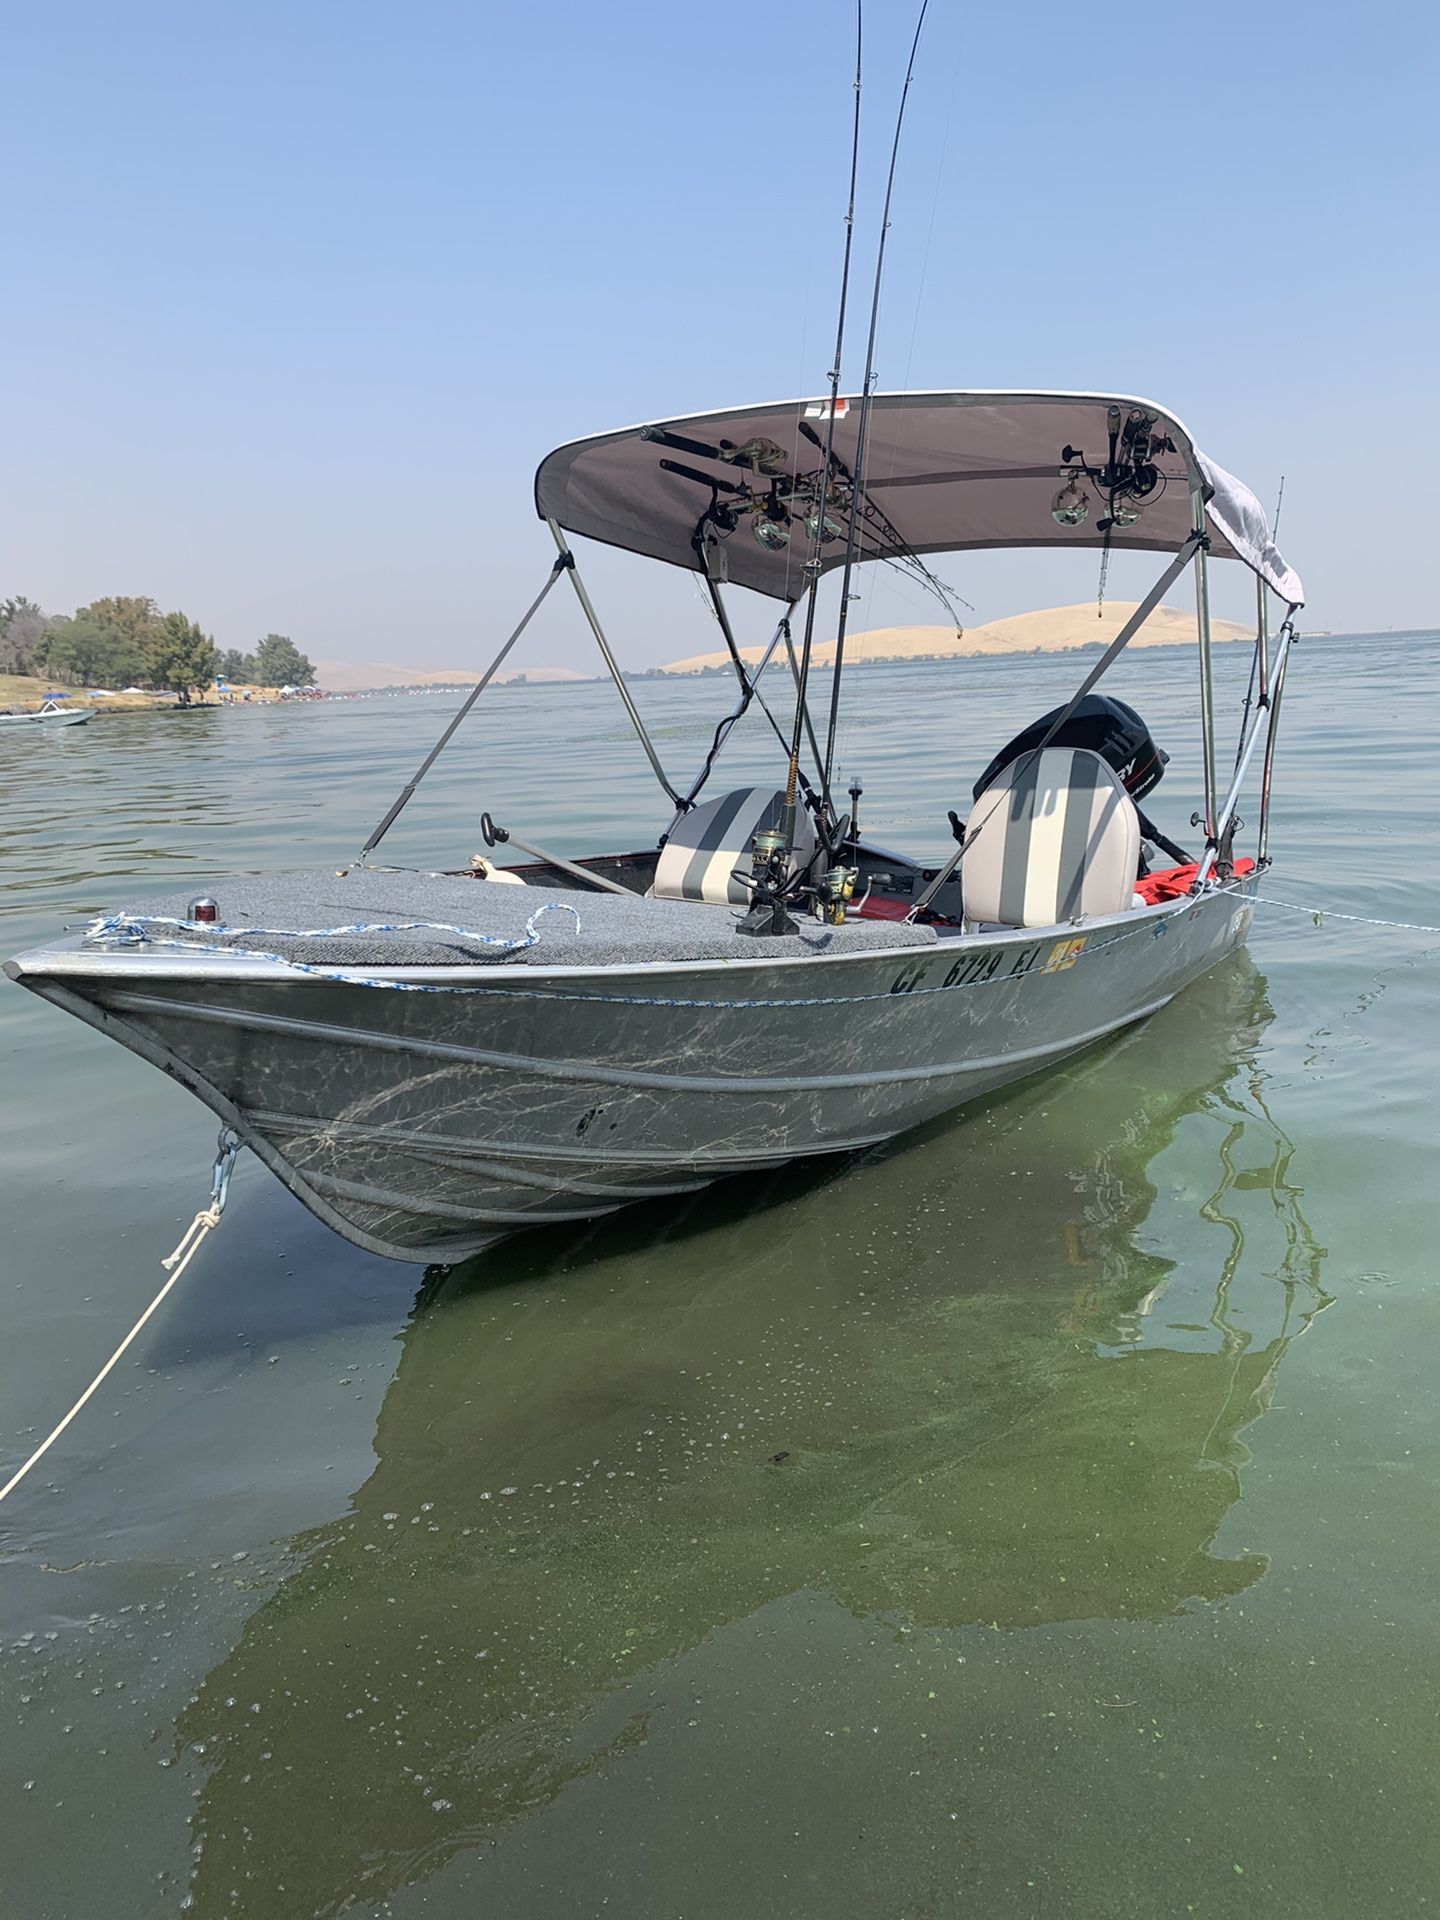 14ft GREGER comes with Mercury 25HP Four stroke Big foot ,Boat comes with Trailer , speakers , Fish Finder, bimi top , rod holders storage space has